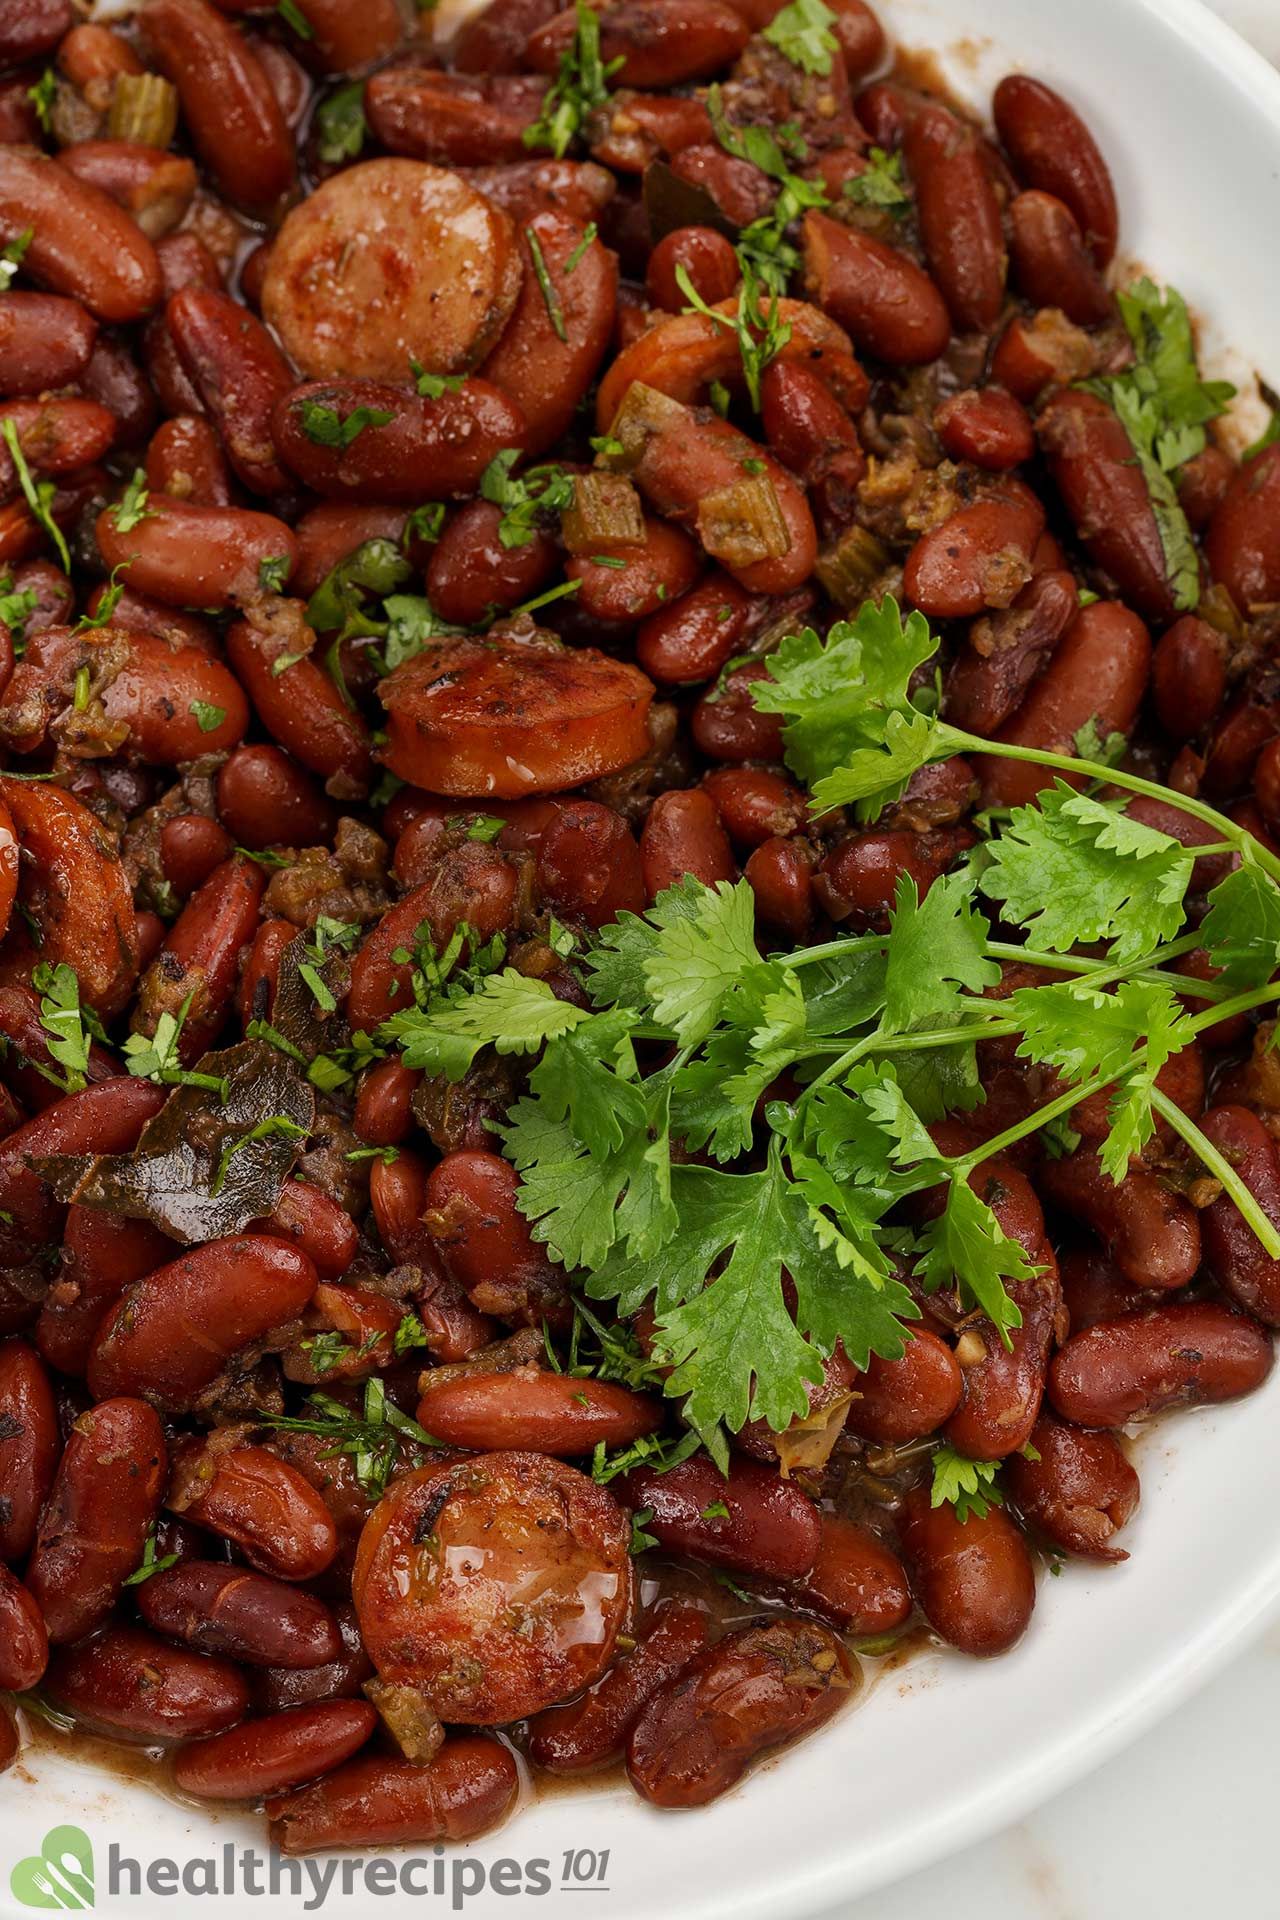 what is the red beans and rice dish